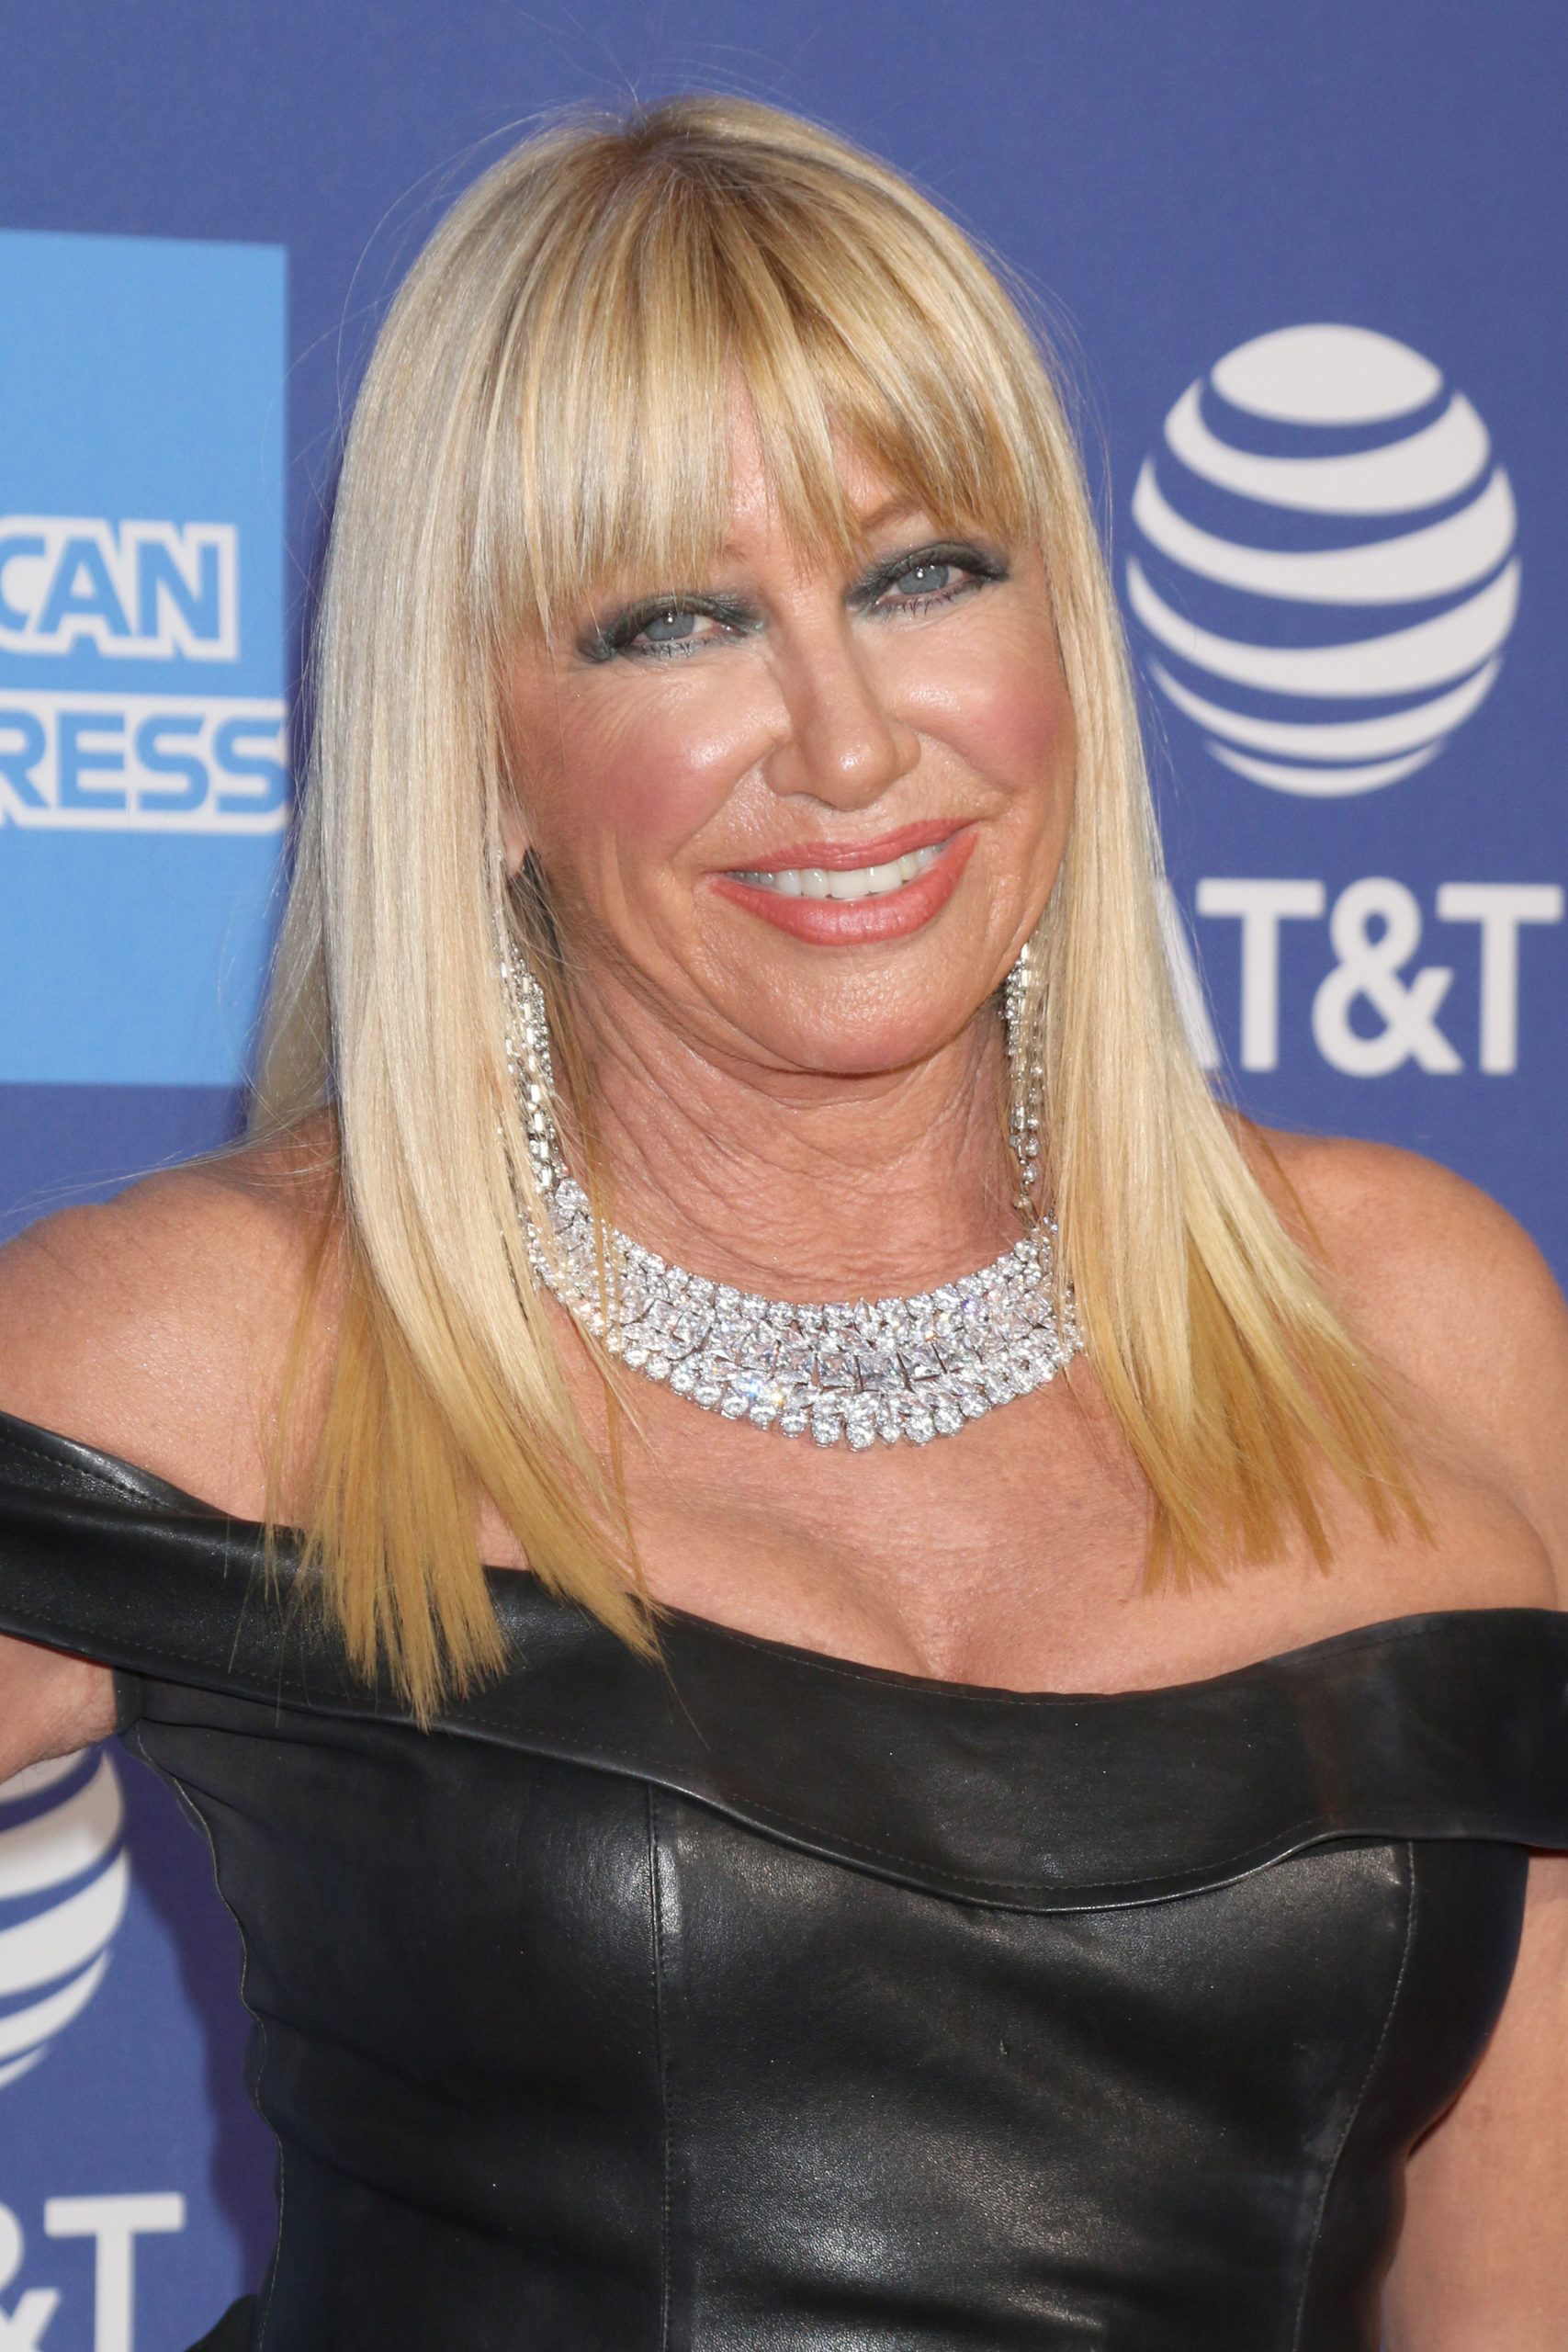 Suzanne Somers' Official Caused of Death Revealed | Nearly two weeks after Suzanne Somers passed away, her official cause of death has been released.